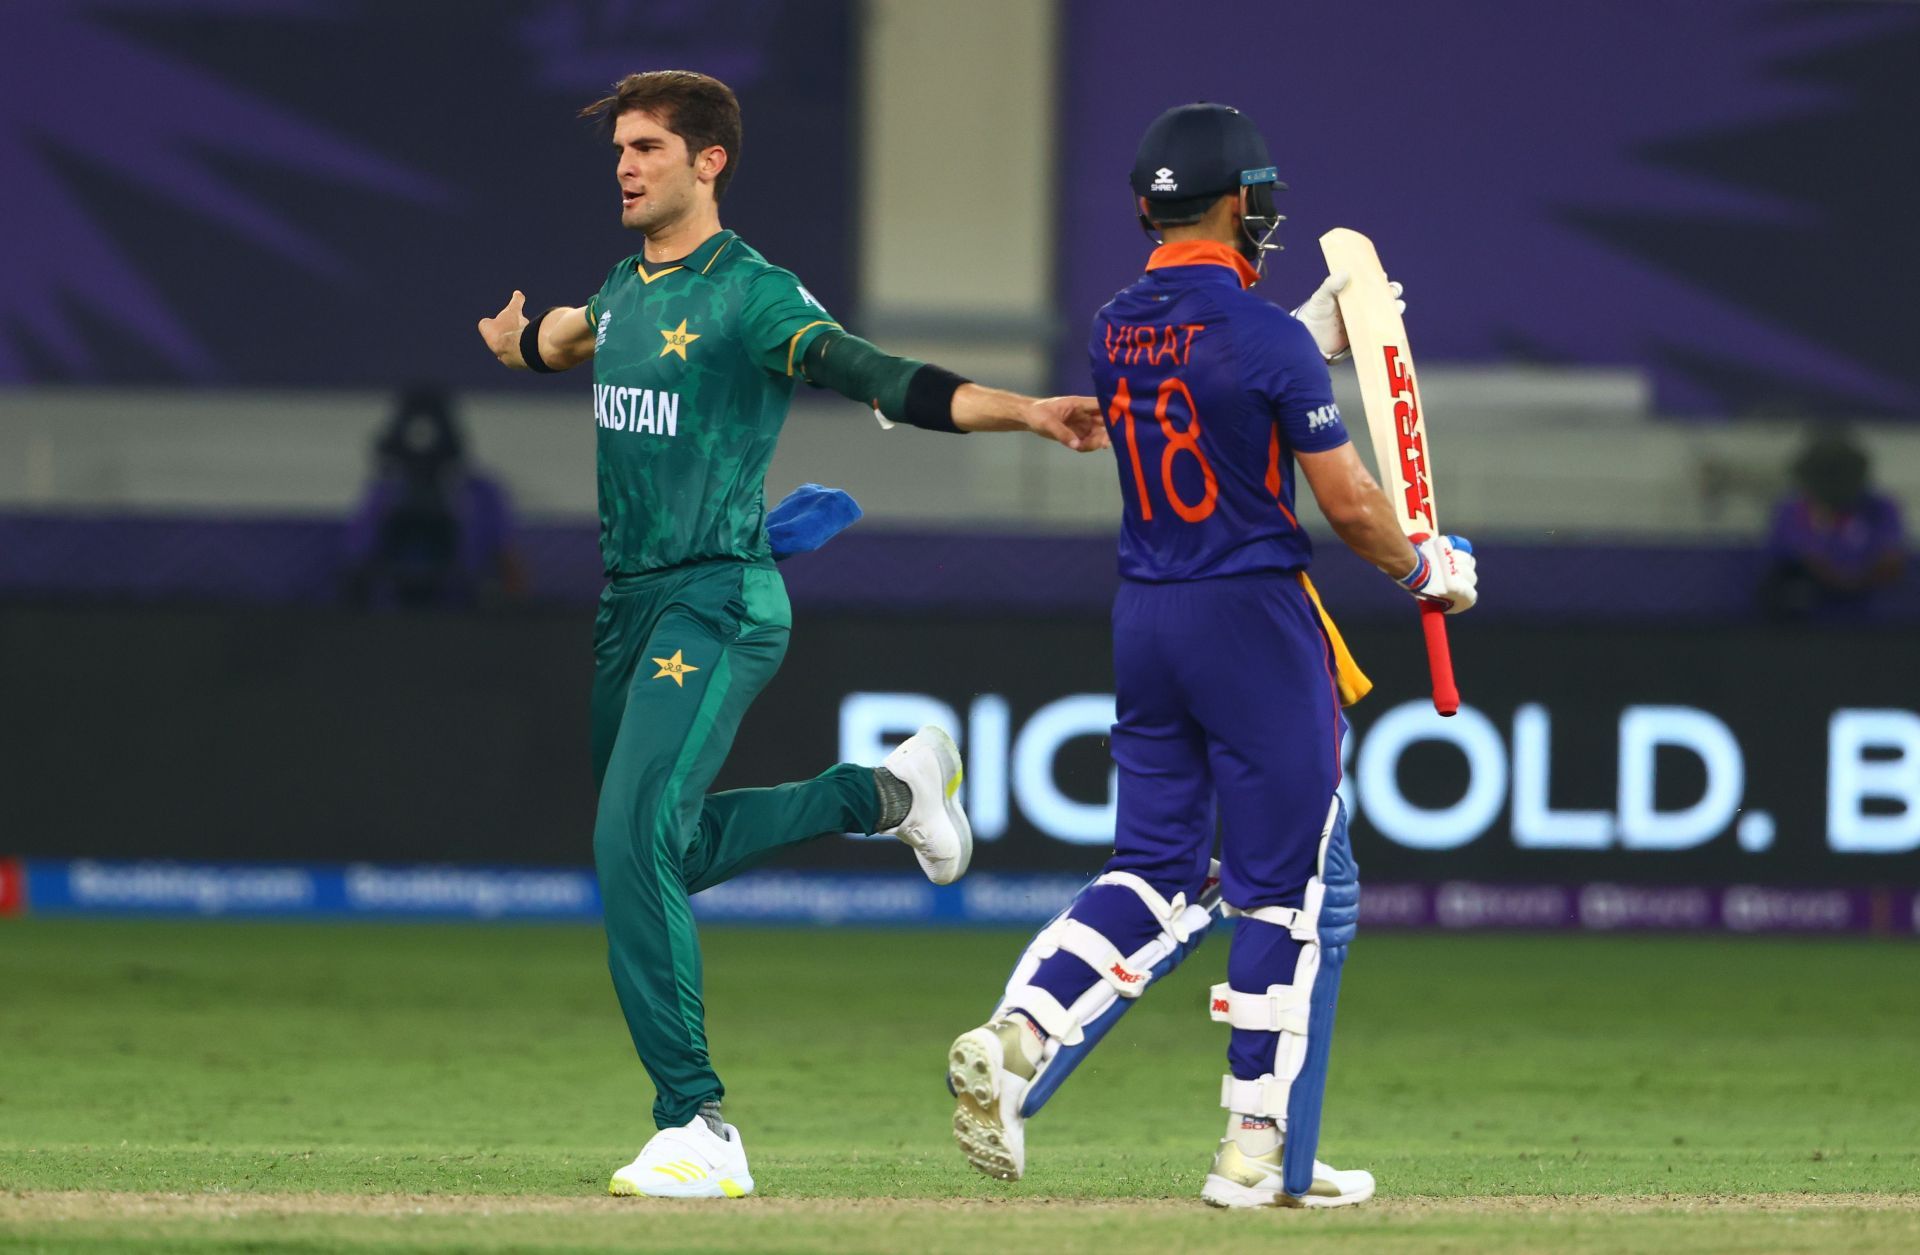 Shaheen Afridi vs Virat Kohli at Lord&#039;s could be a mouth-watering contest. (Image: Getty)